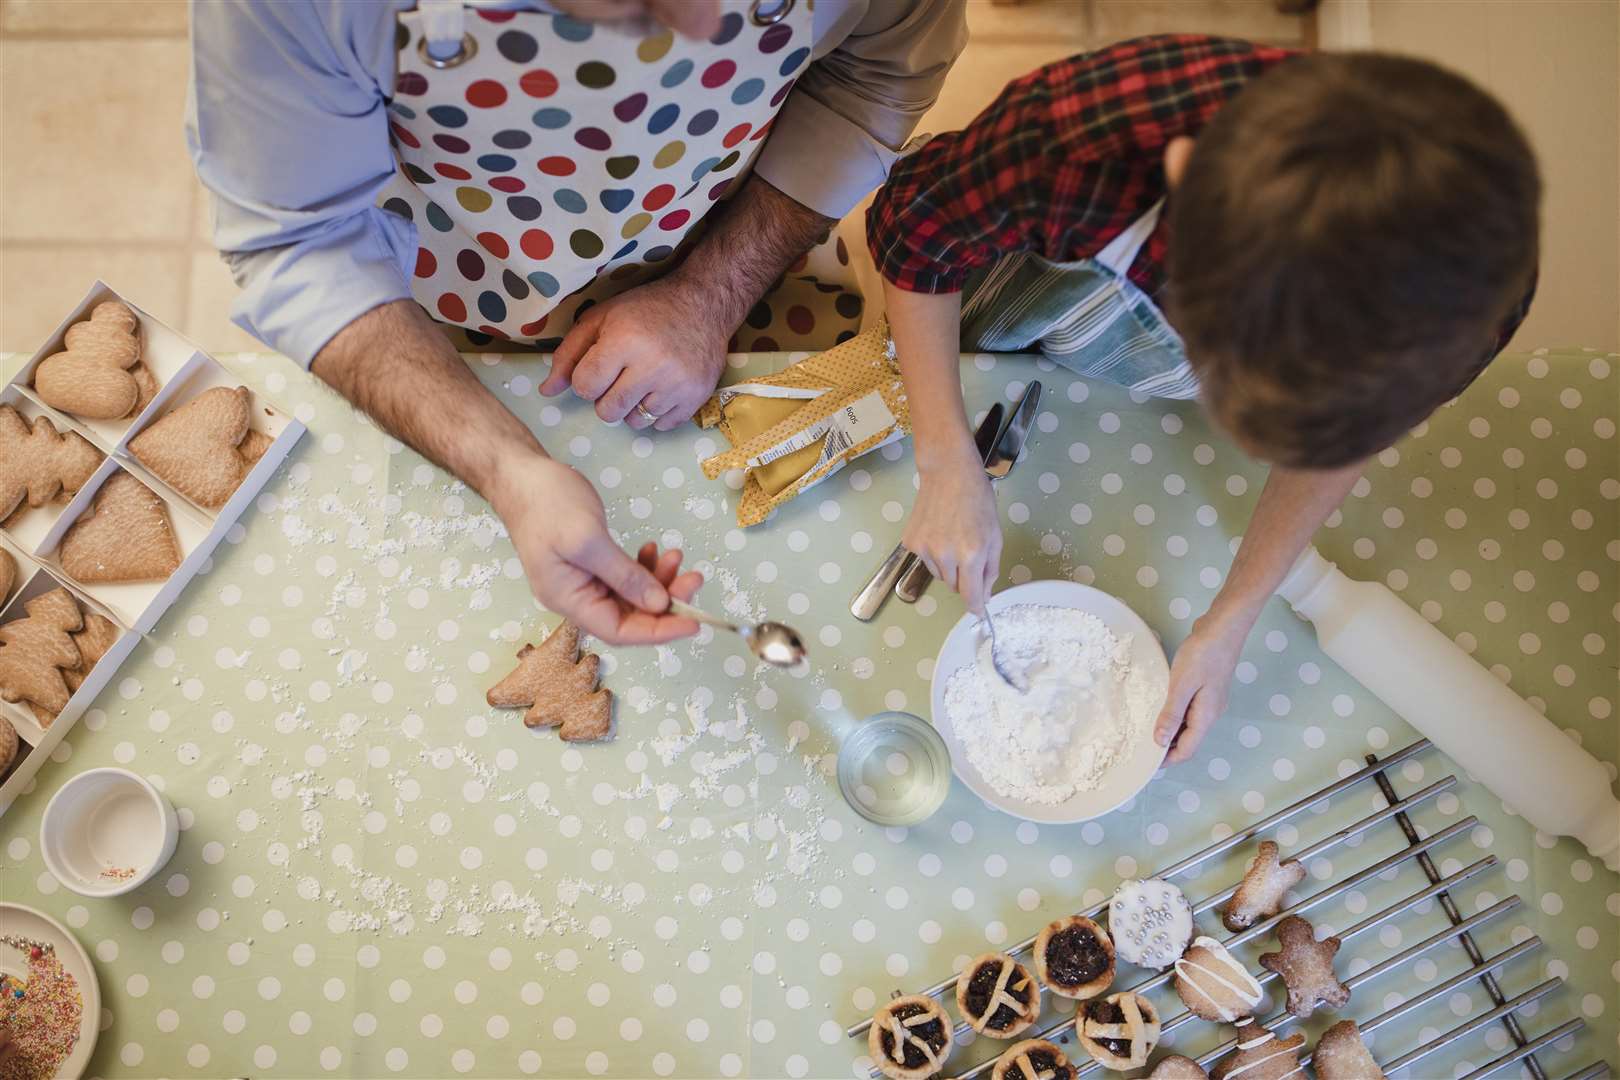 Baking at Christmas is popular with youngsters